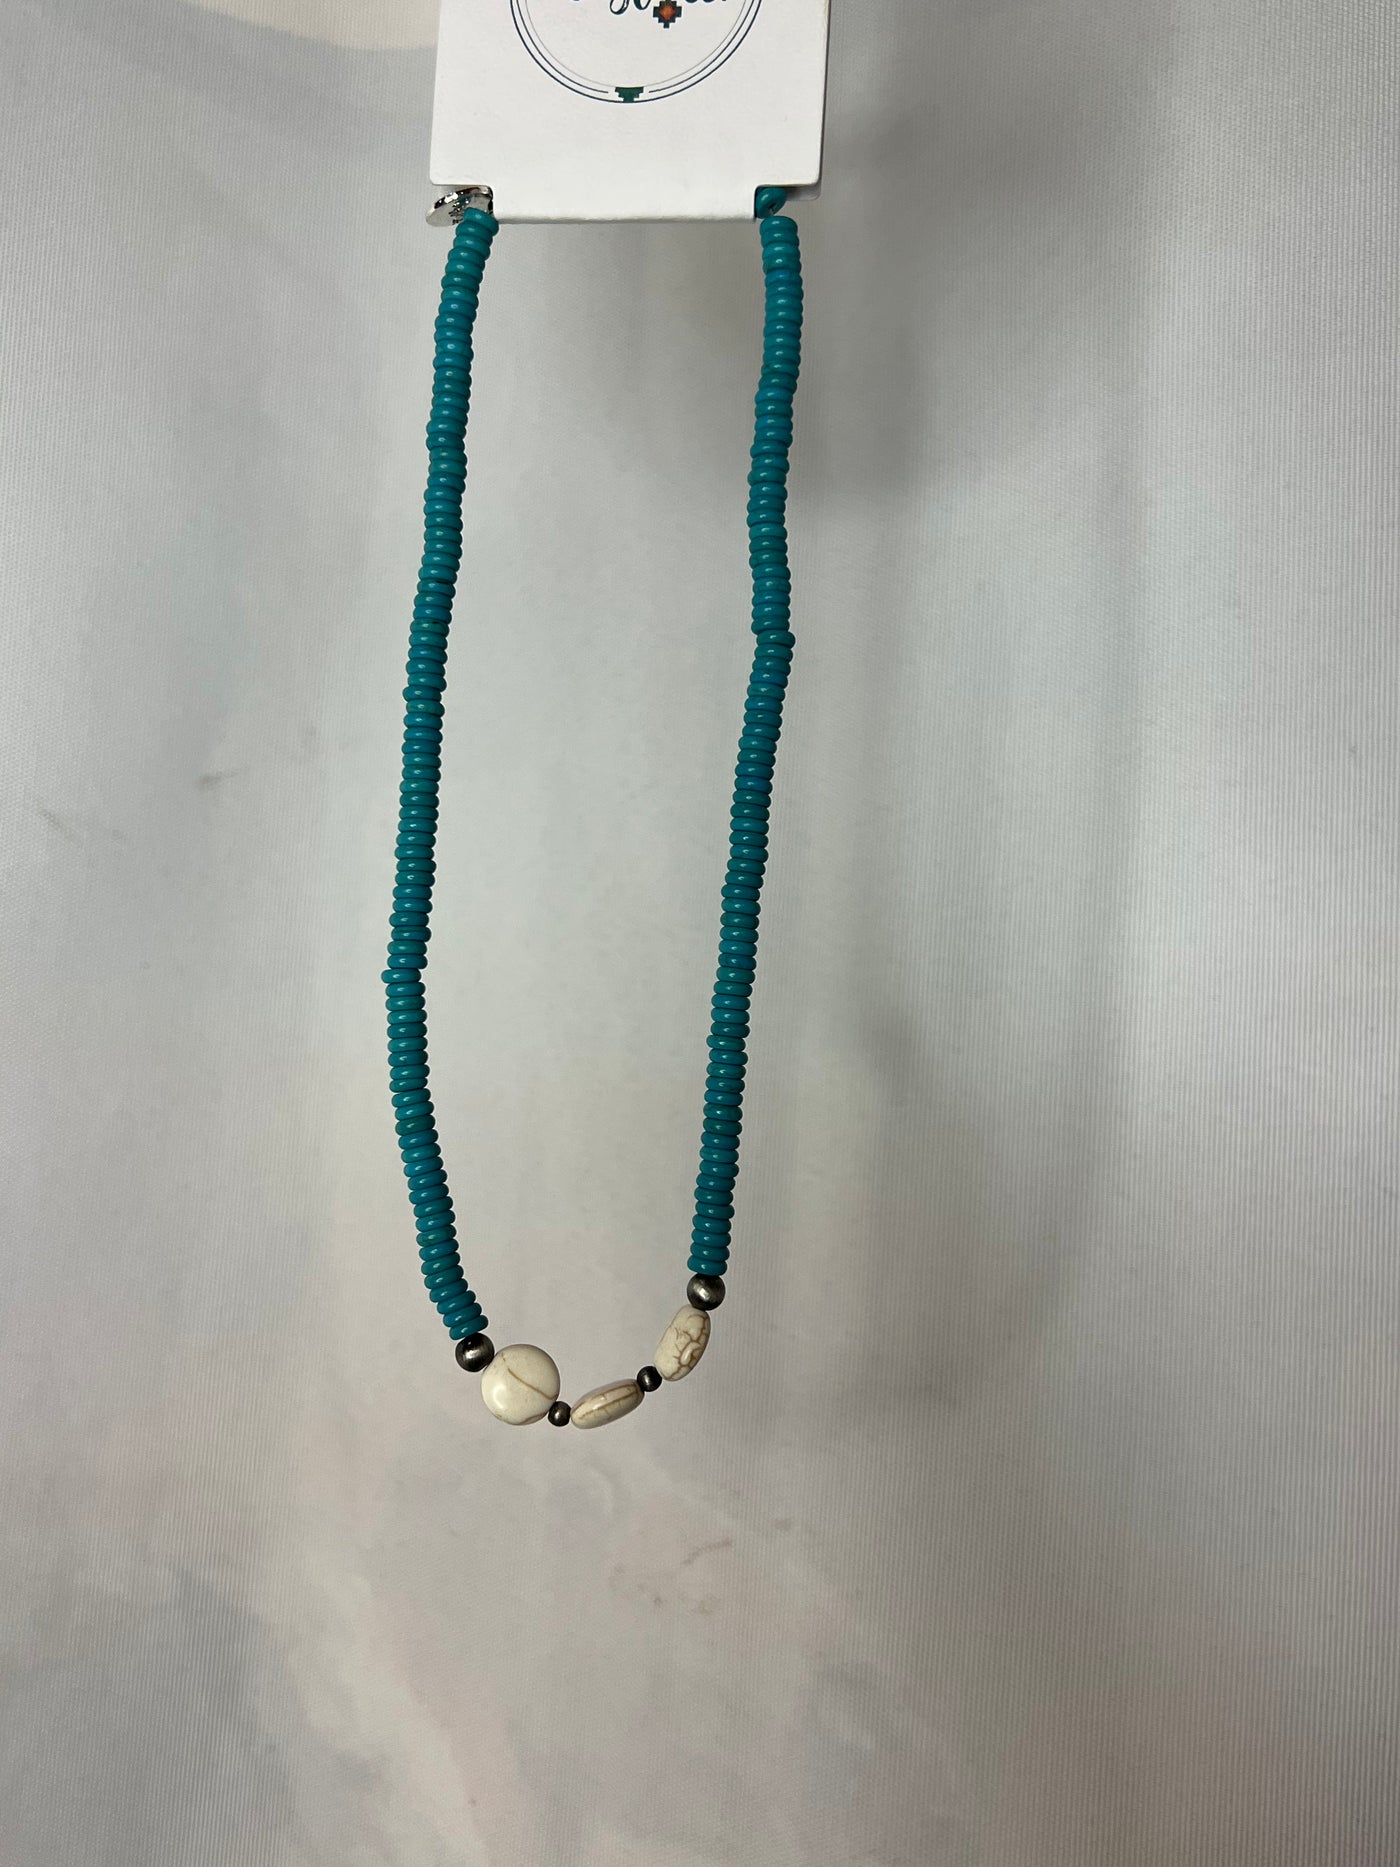 West & Co. Turquoise Beads with Cream Stone Choker